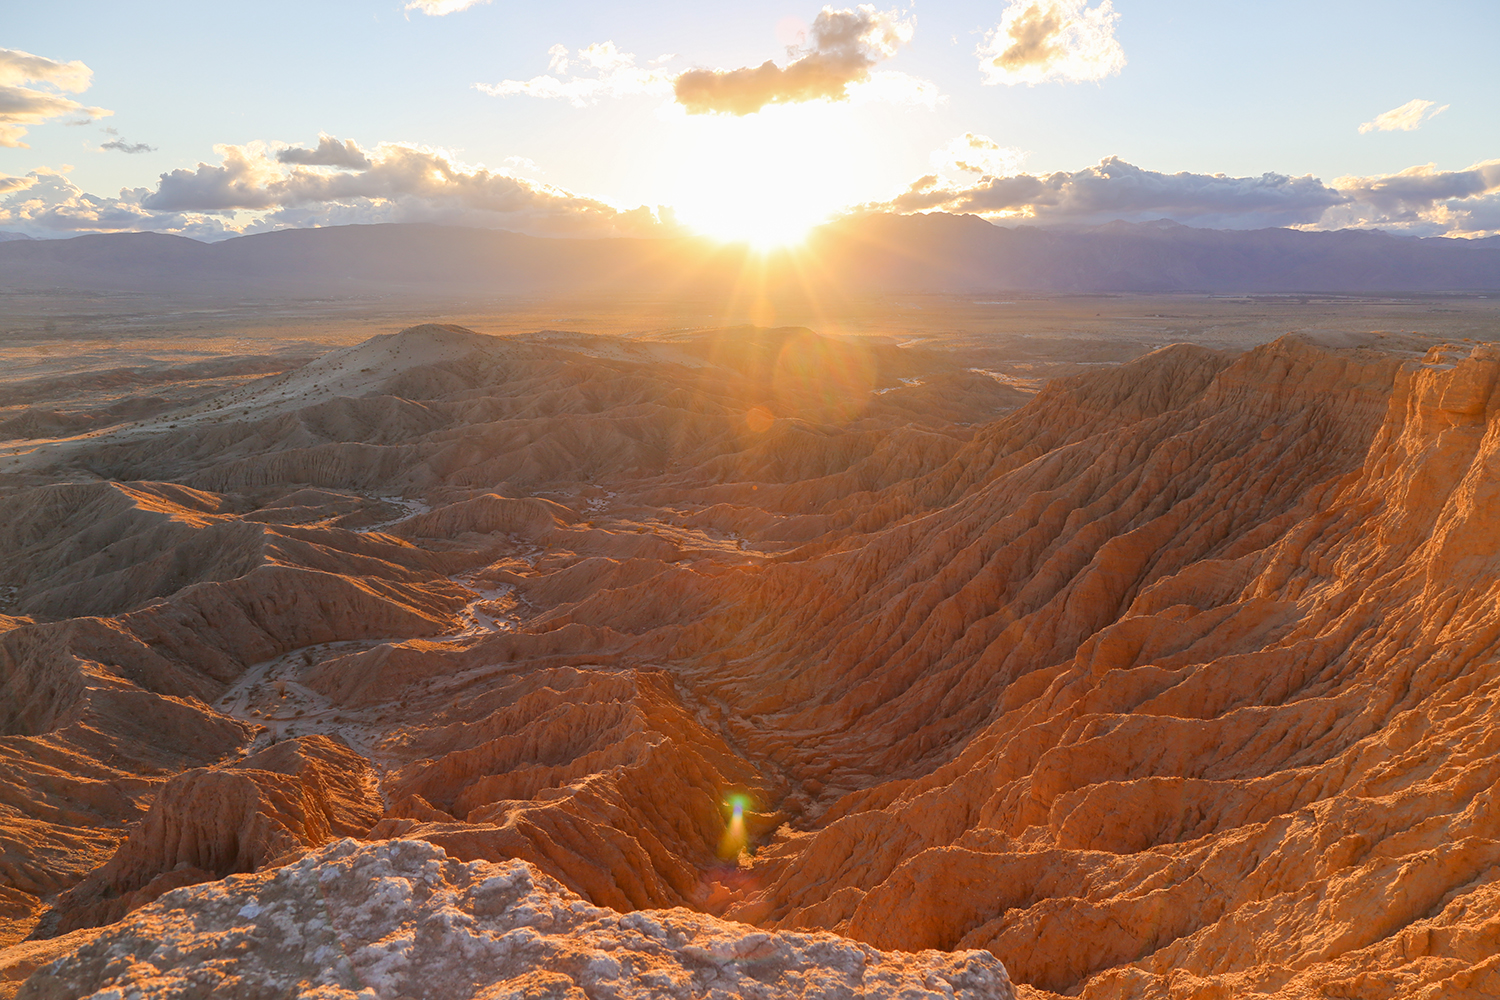 Sunset view at Font's Point in Anza Borrego Desert, California.